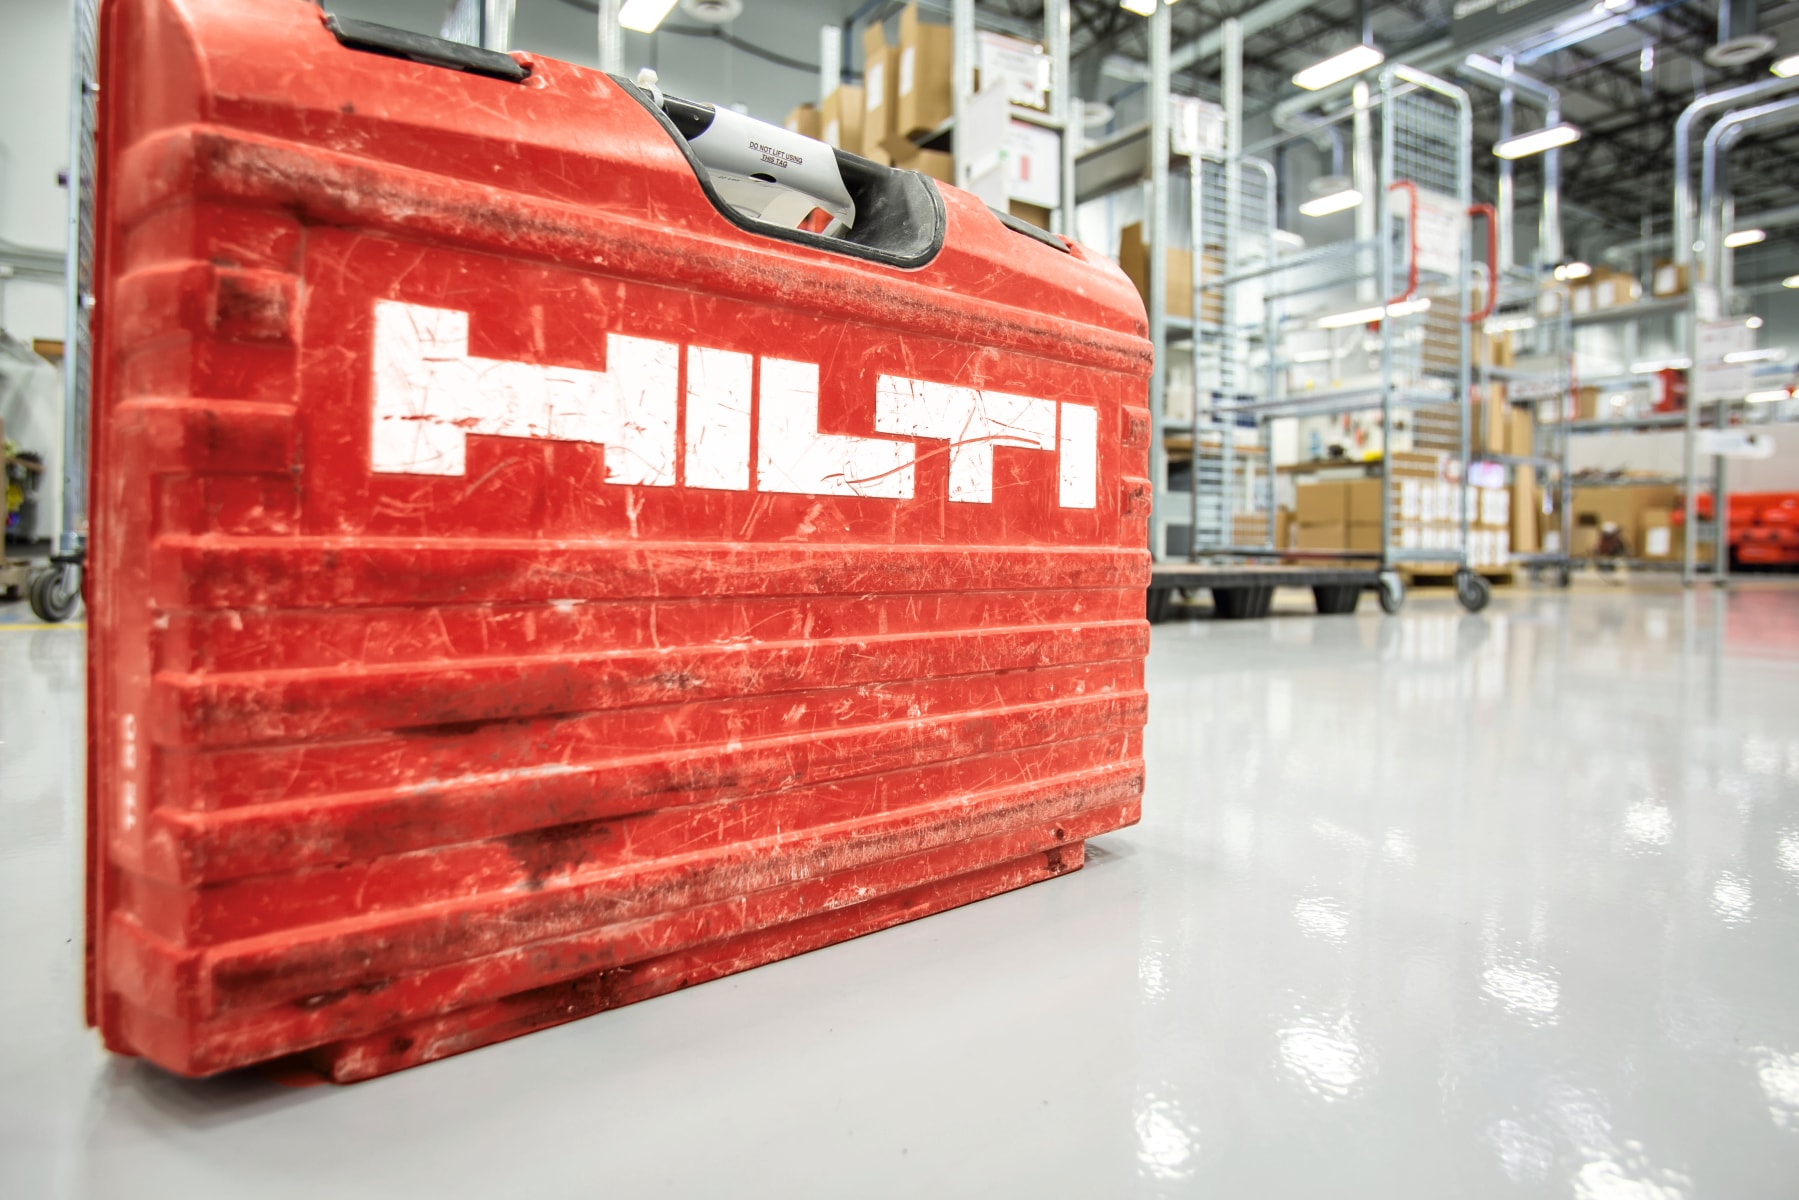 Tool Repair and Lifetime Services - Hilti Corporation